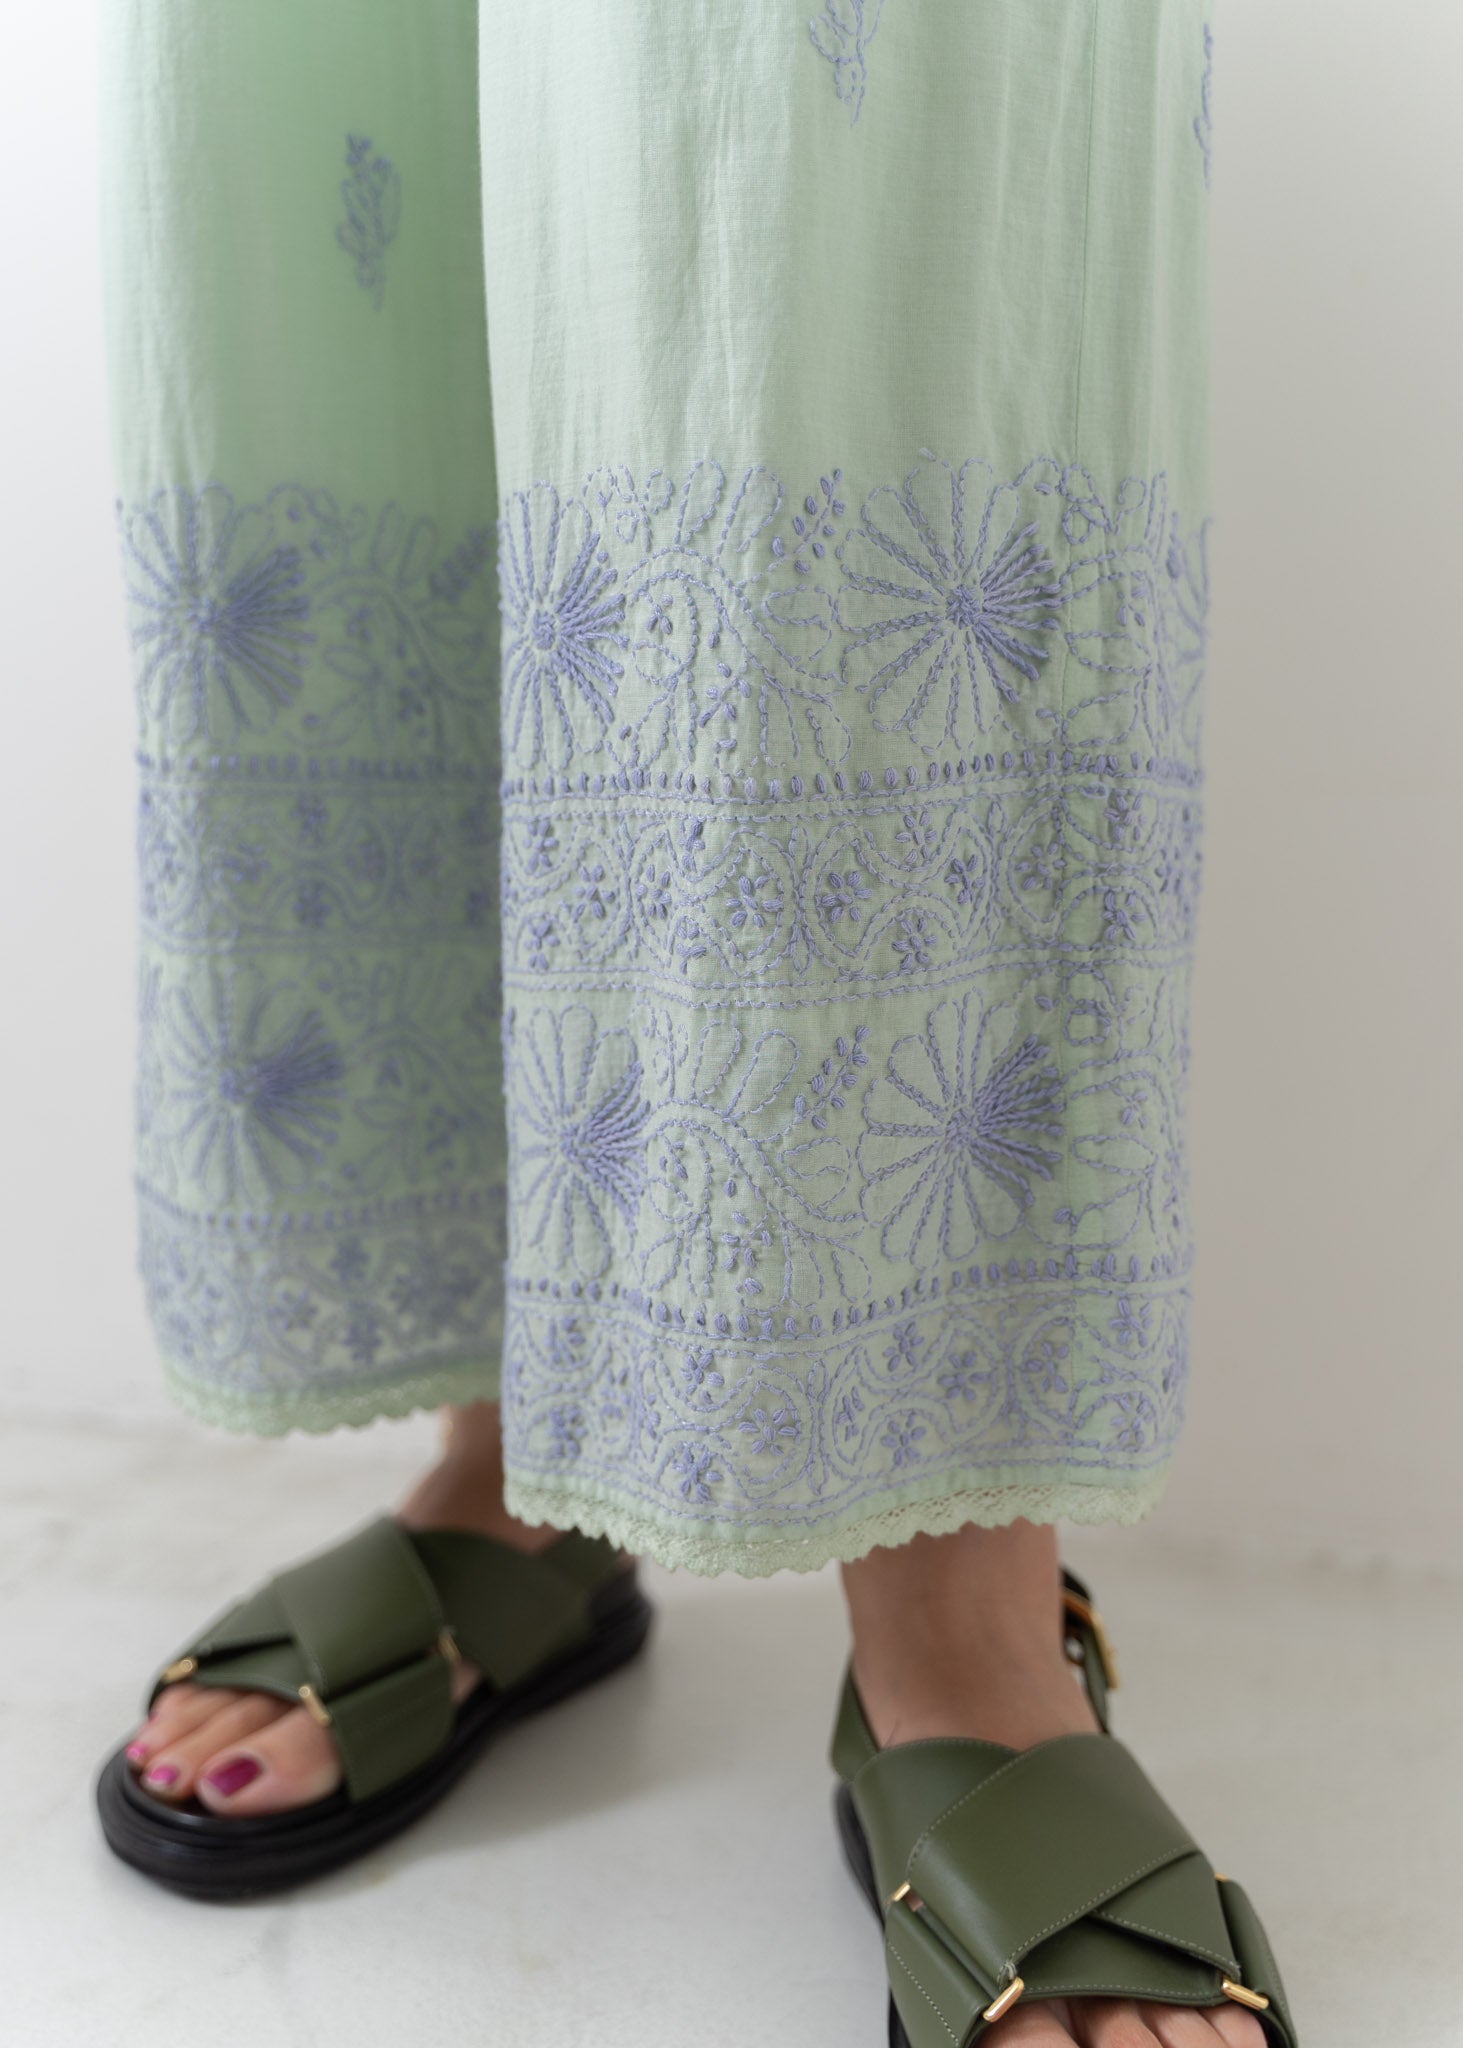 Cotton Voile Lucknow Embroidery Pants